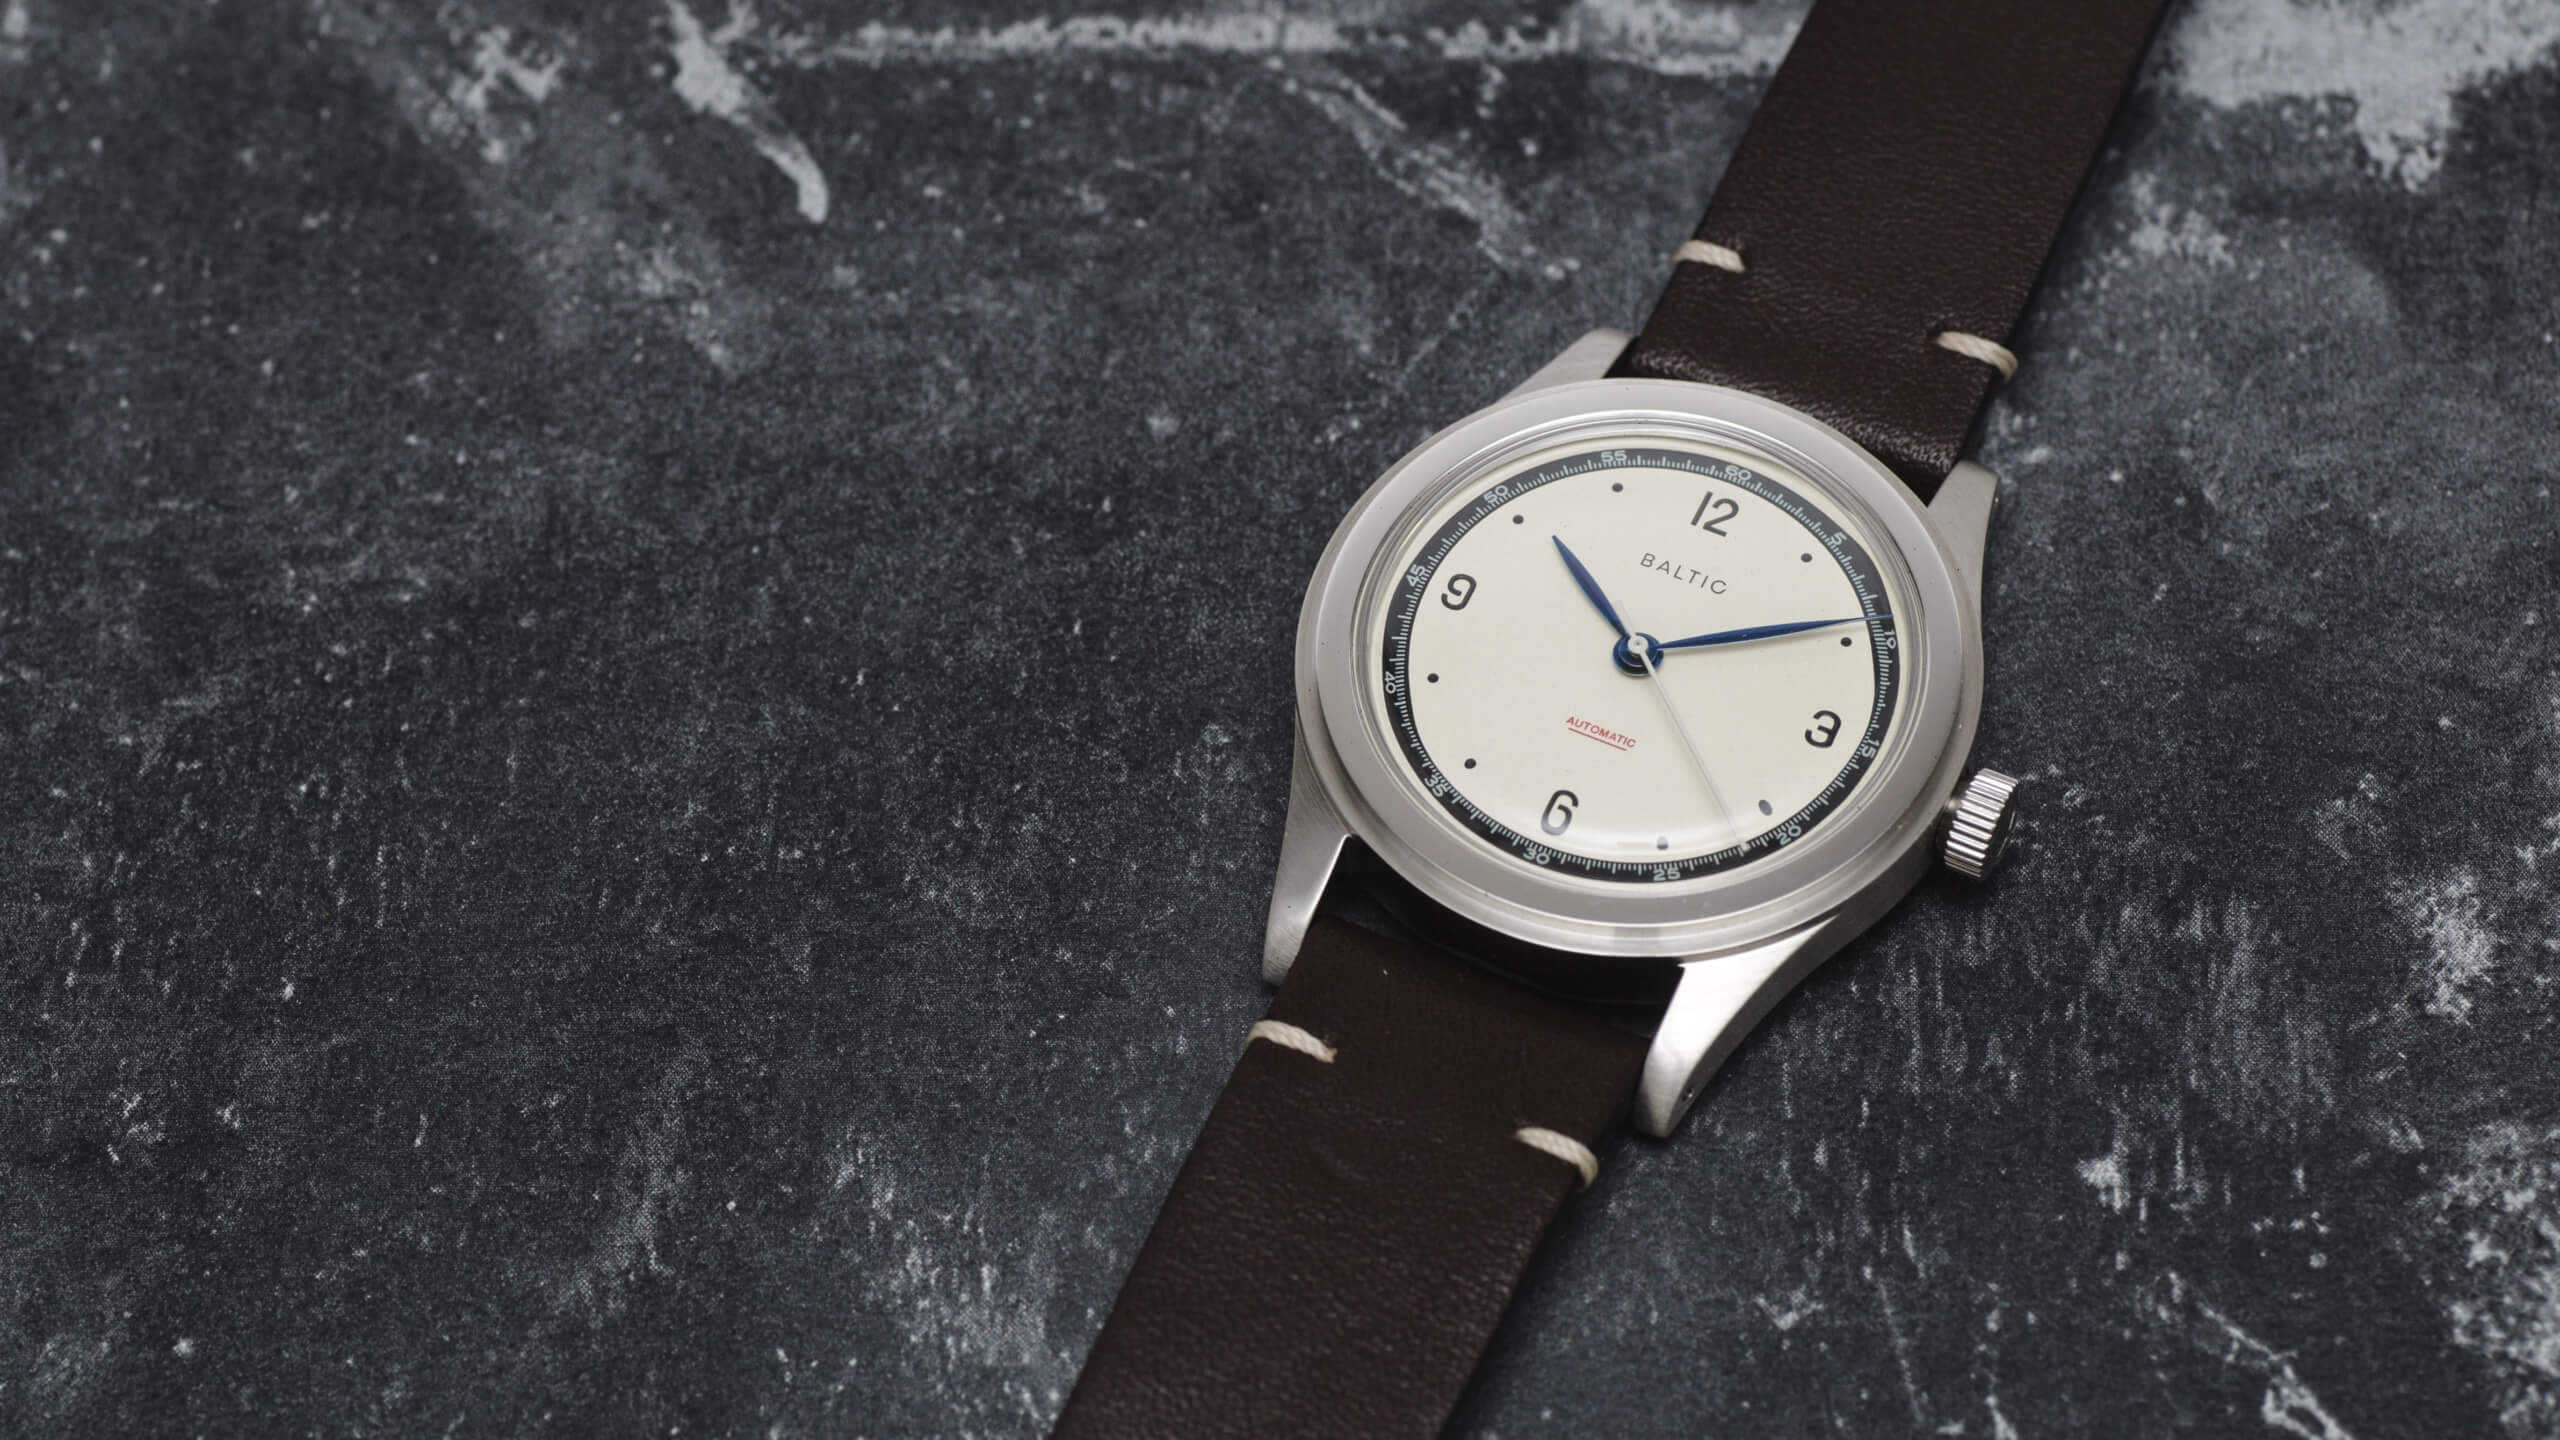 Baltic HMS 01 timepiece with a cream coloured dial and dark brown leather strap.